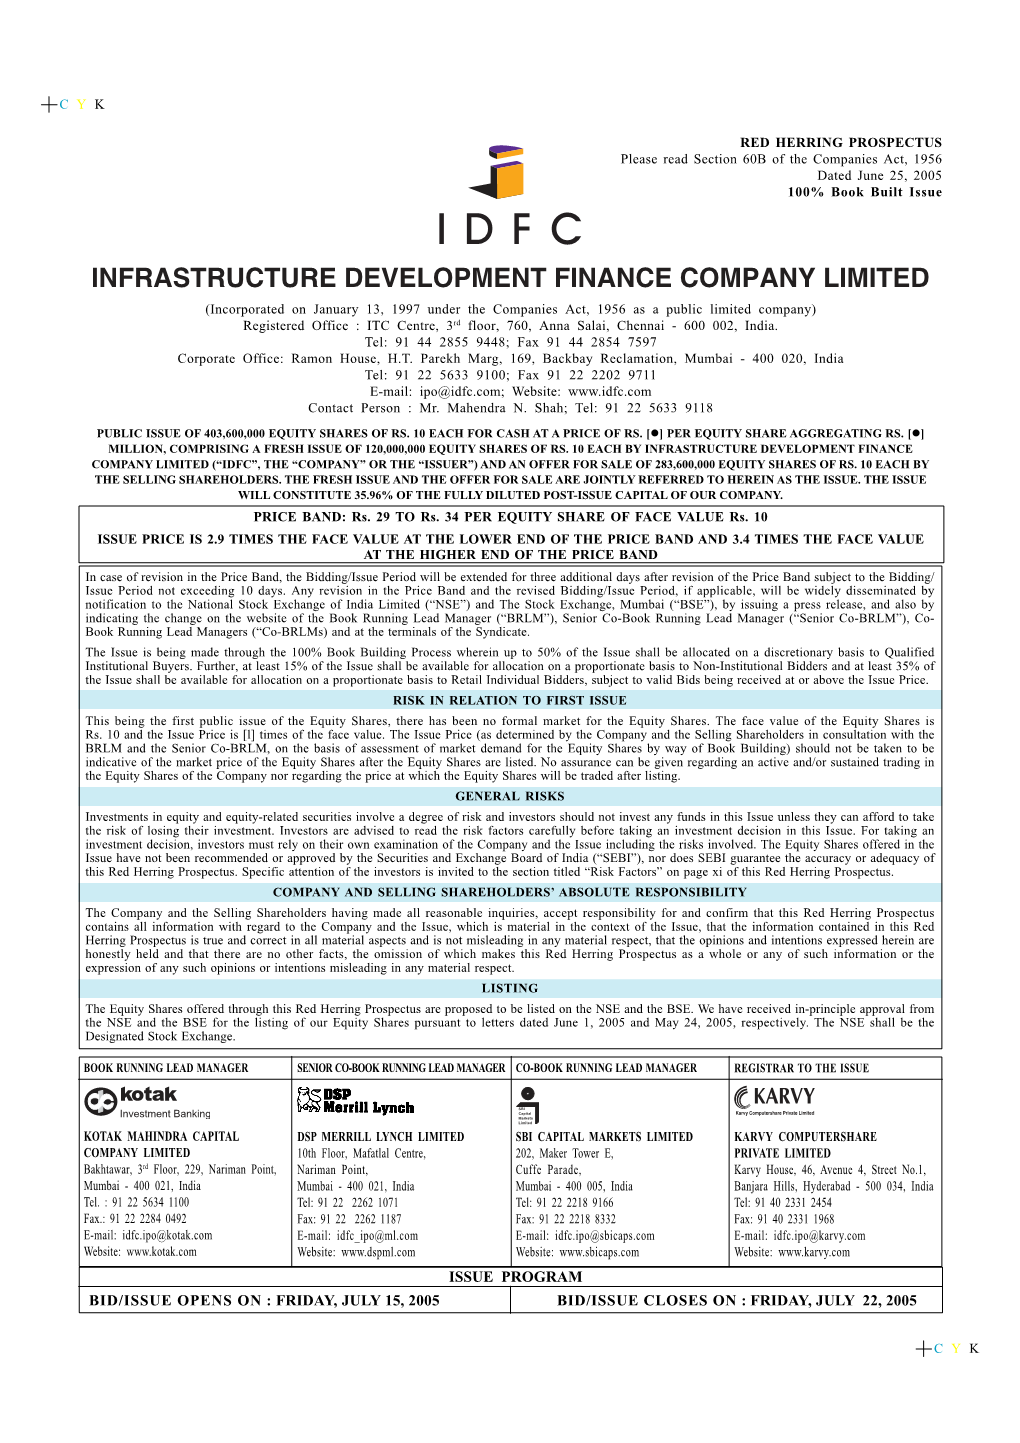 Infrastructure Development Finance Company Limited (“Idfc”, the “Company” Or the “Issuer”) and an Offer for Sale of 283,600,000 Equity Shares of Rs